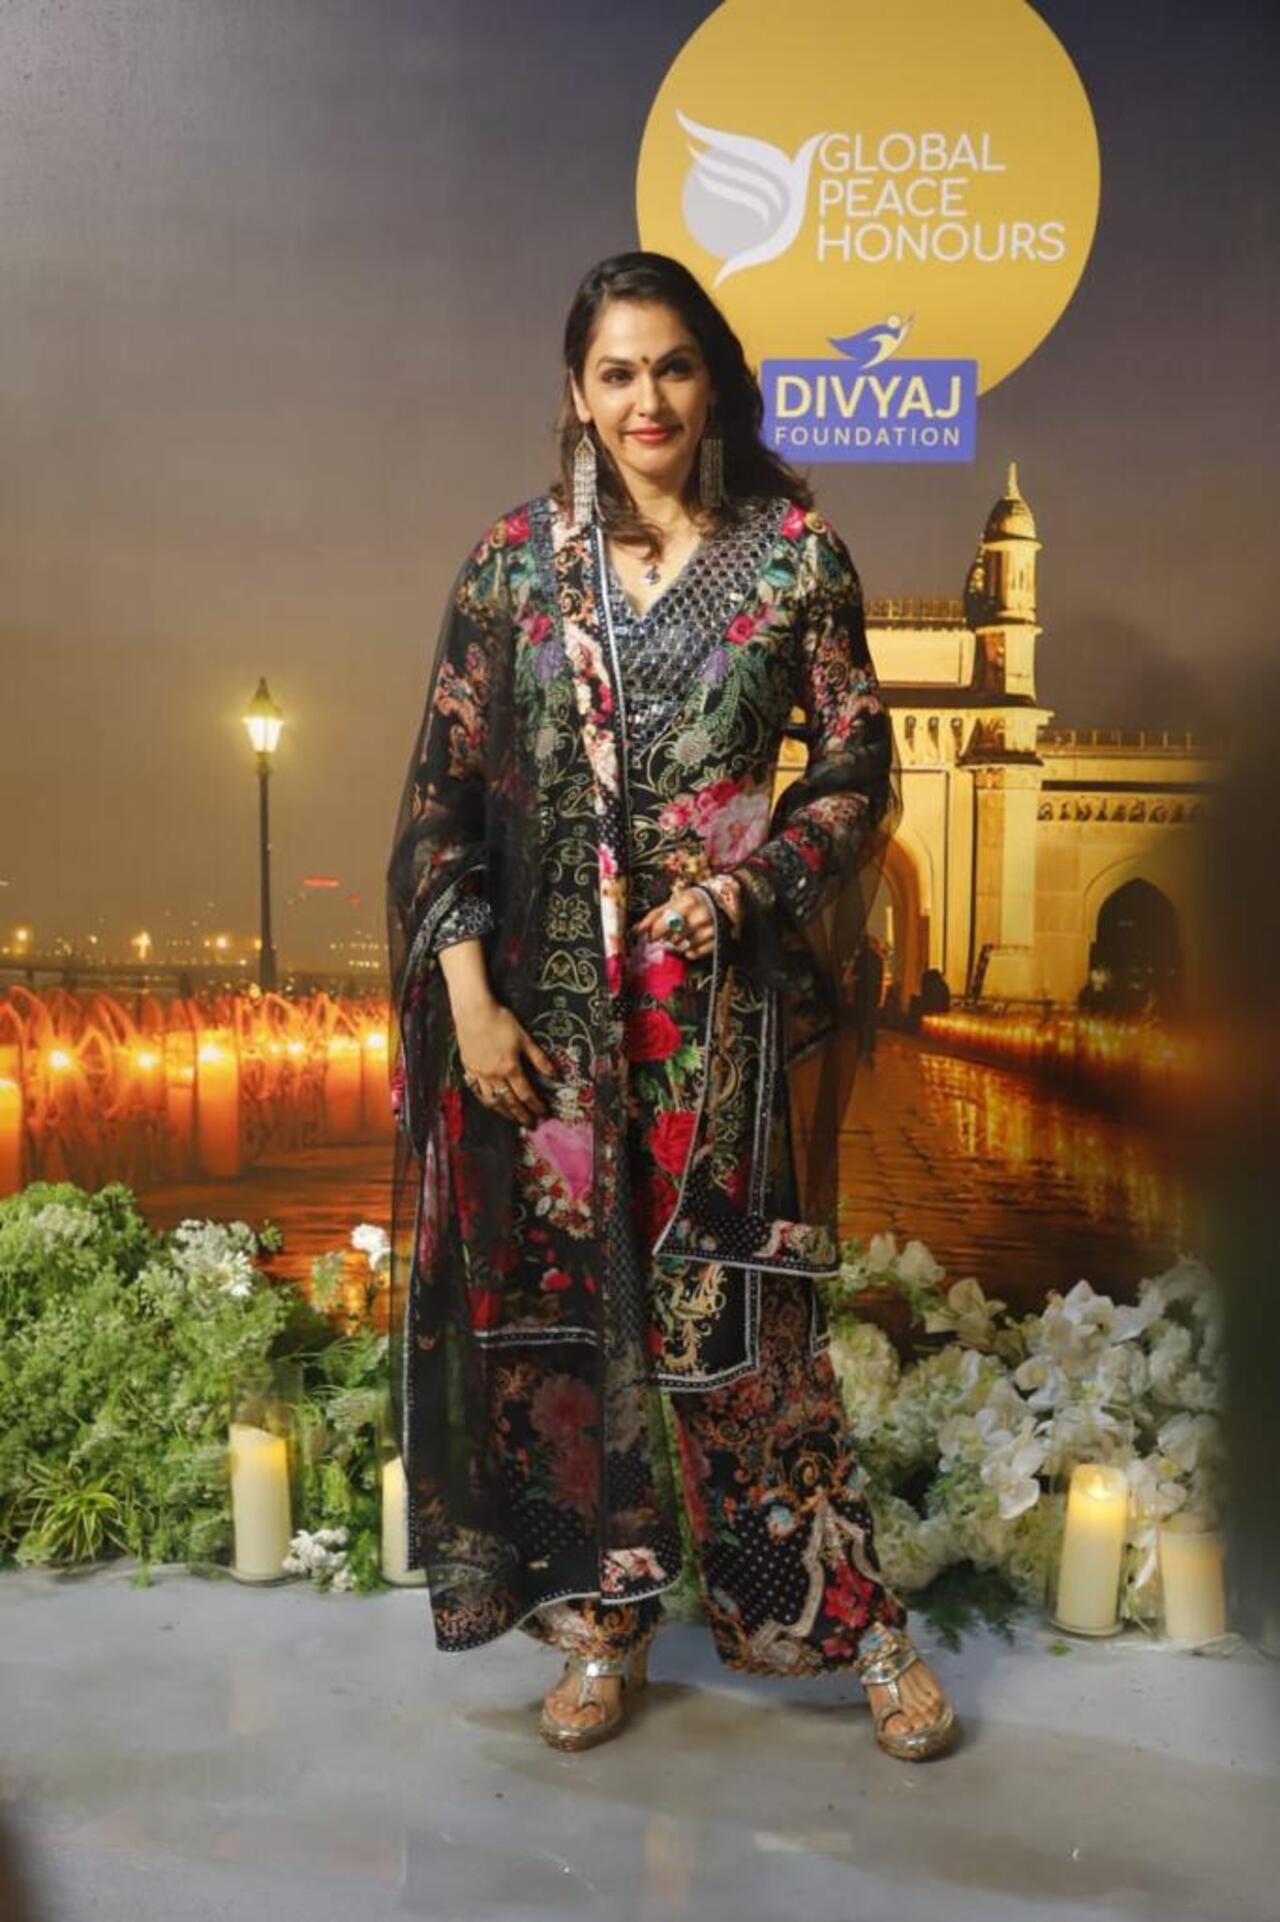 Isha Koppikar arrived for the event in a simple colourful printed anarkali suit